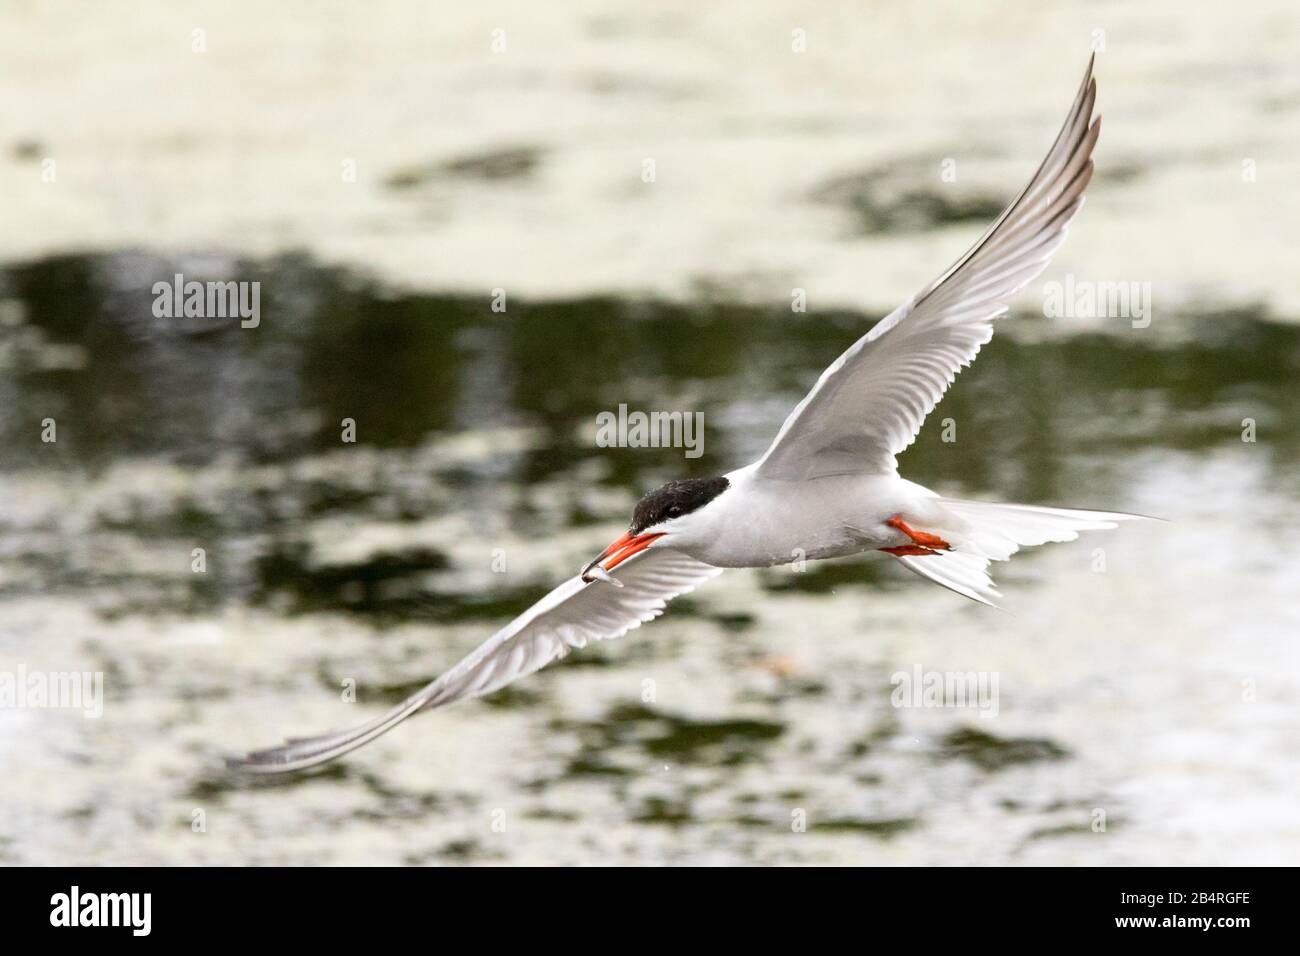 A common tern, with a fish in its beak, swoops over a lake in Bushy Park, West London Stock Photo